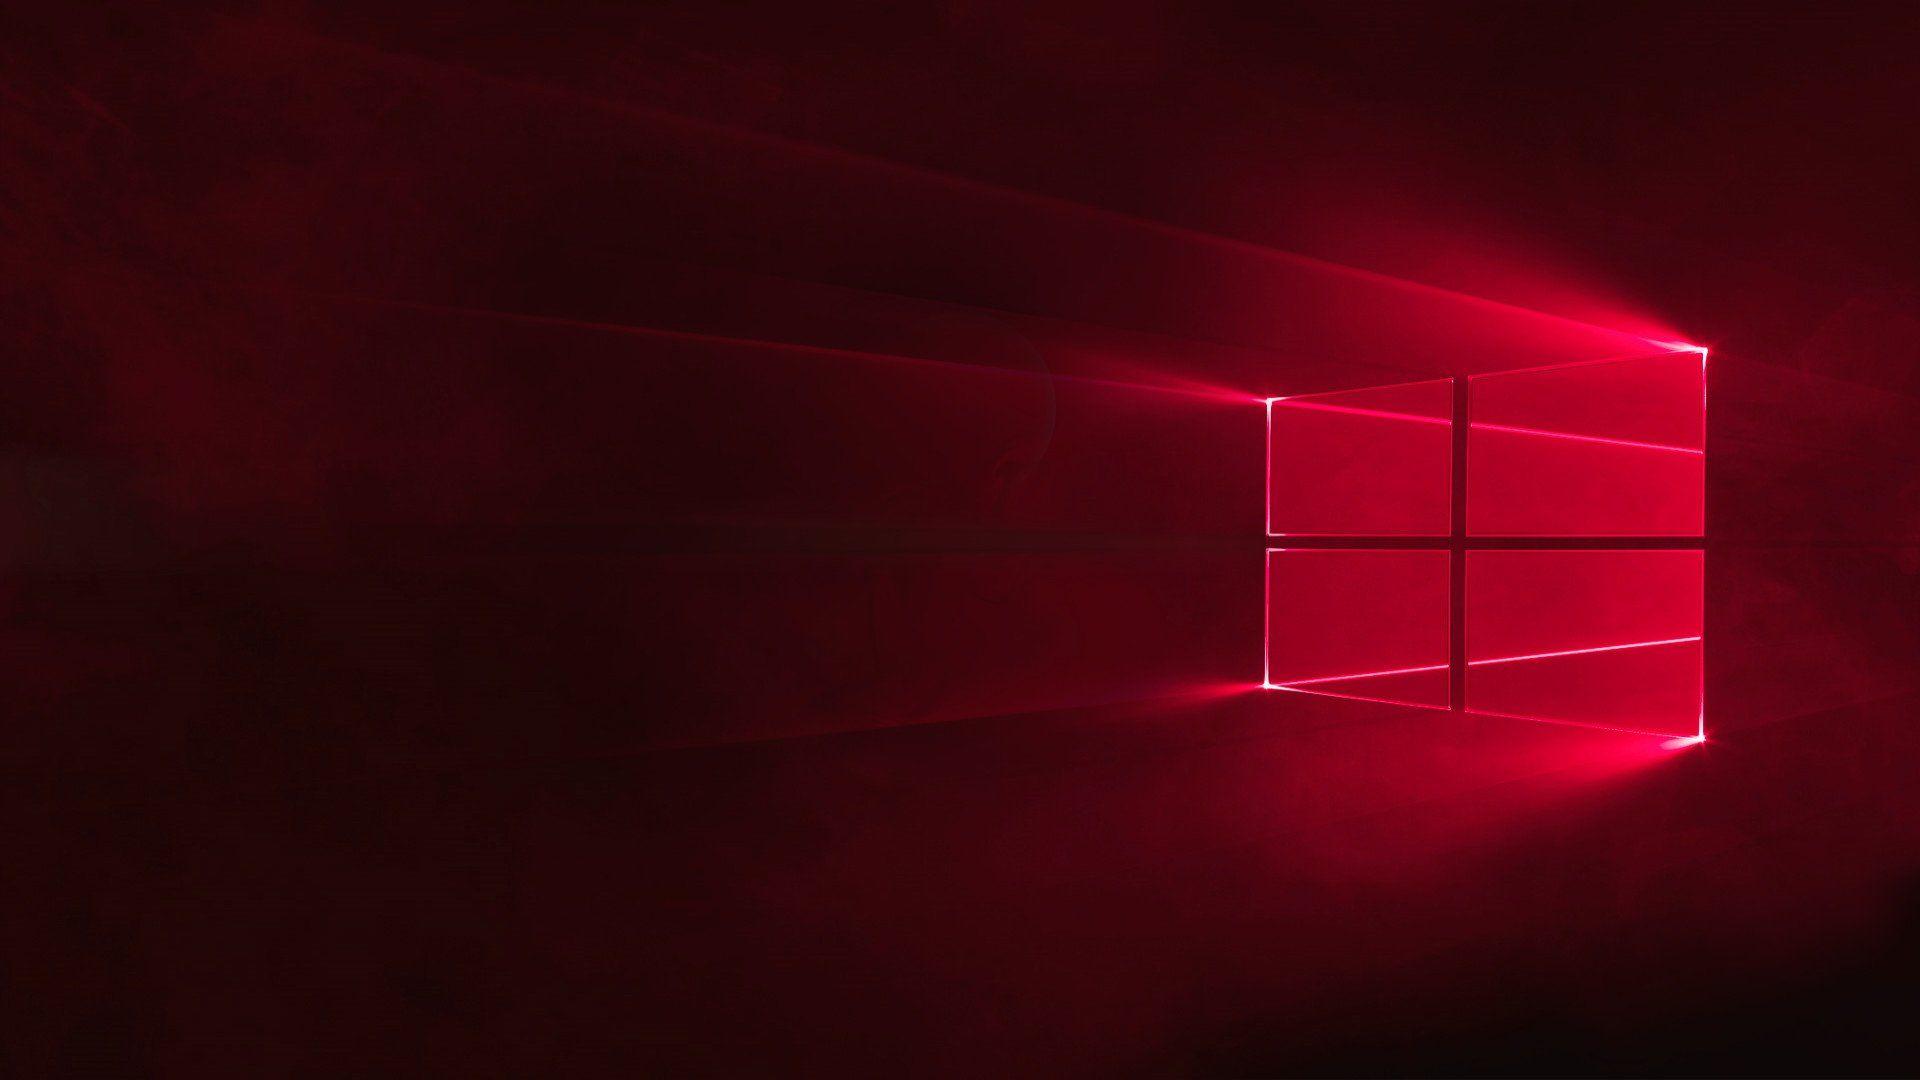 Red Windows 10 Wallpapers - Top Free Red Windows 10 Backgrounds ...